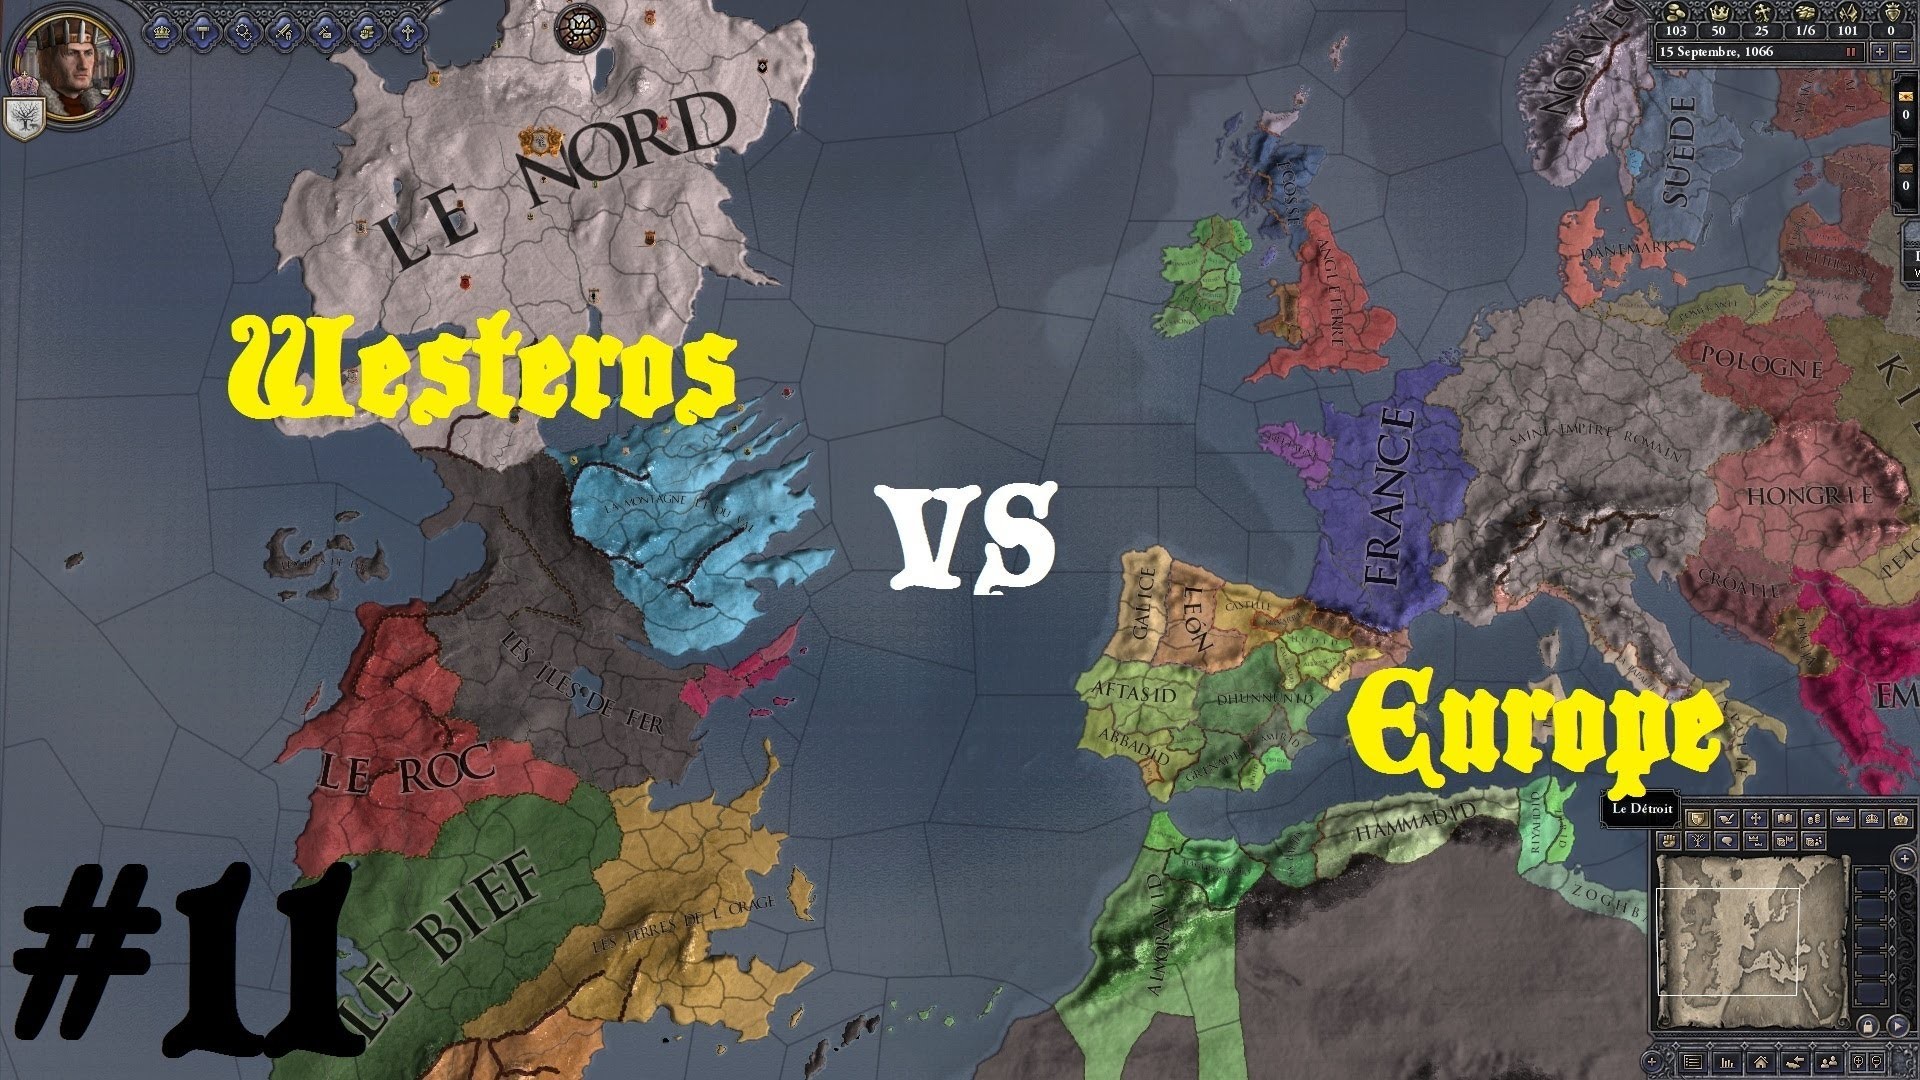 1920x1080 Crusader Kings 2 - Game of Thrones : Westeros vs L'Europe #11 (fin) ! Par  Uneuro - YouTube